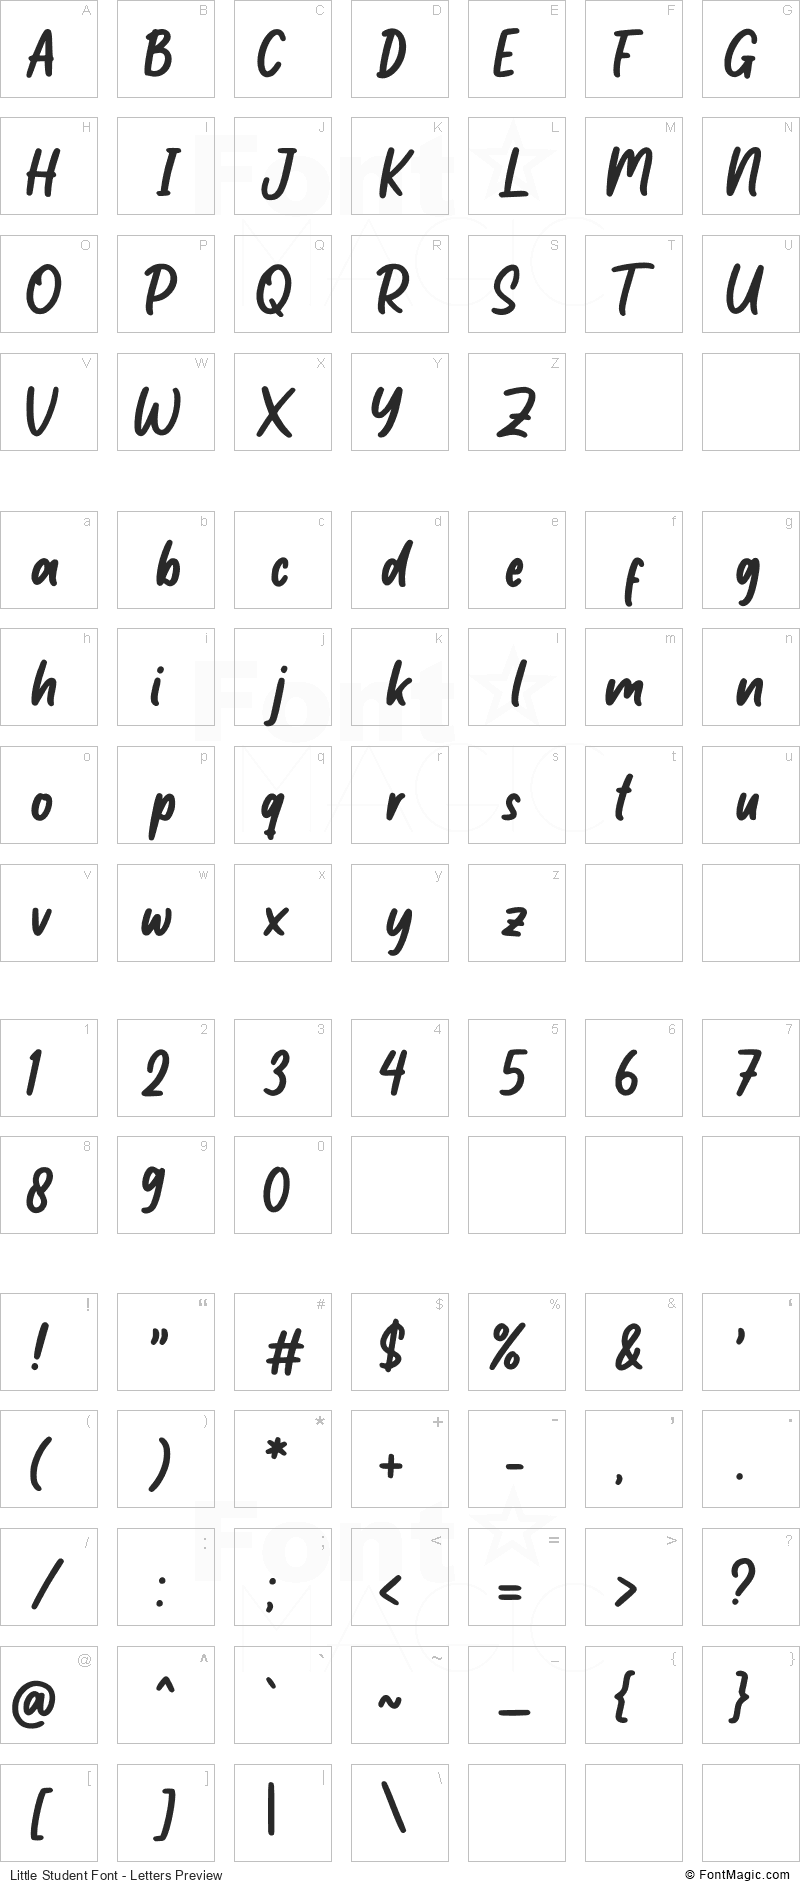 Little Student Font - All Latters Preview Chart